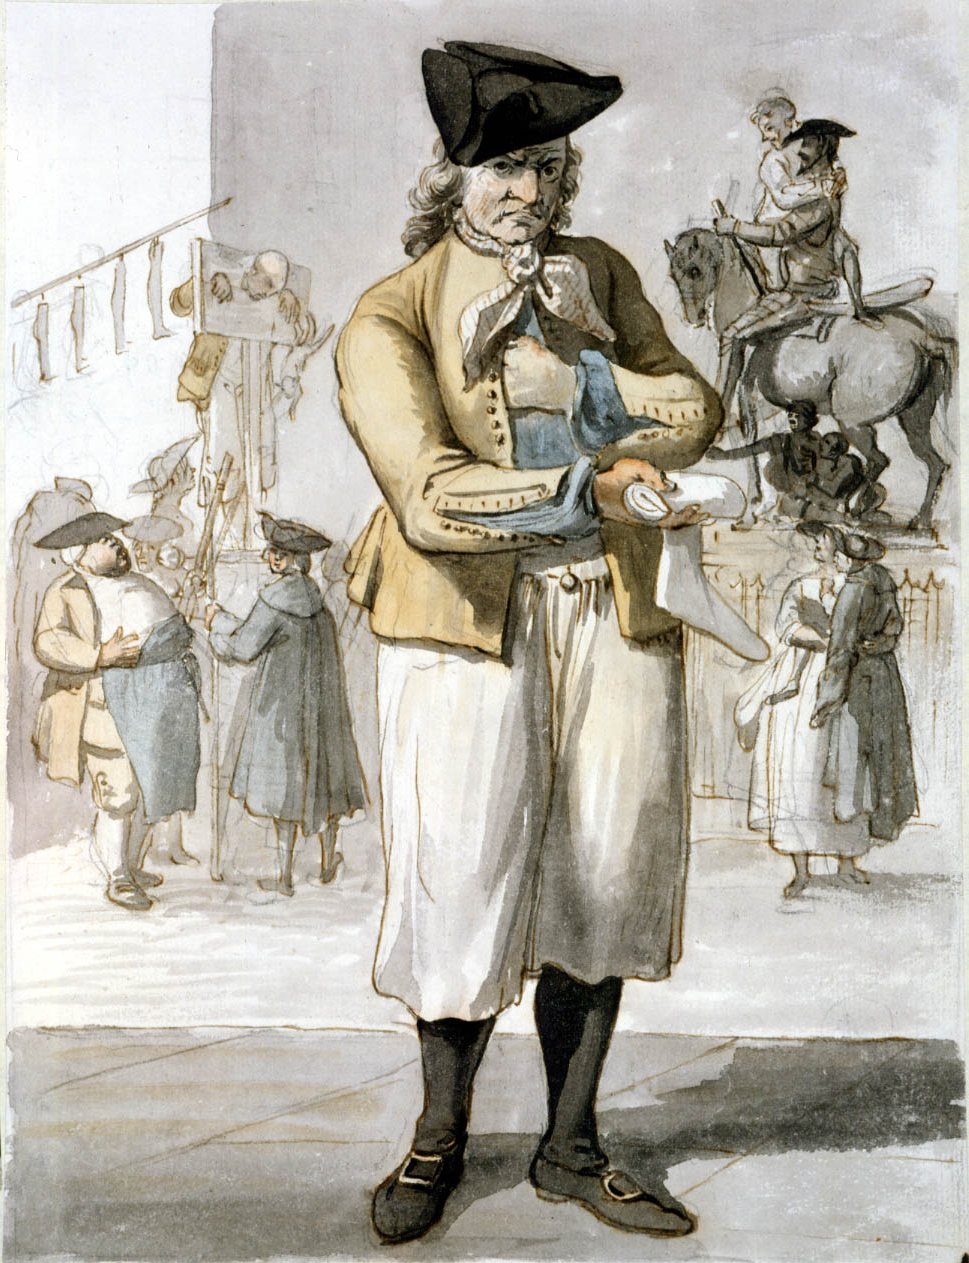 A man in white breeches, proffering a pair of socks with one hand looks straight at the viewer.  An equestrian statue and a man in the pillory can be seen in the background